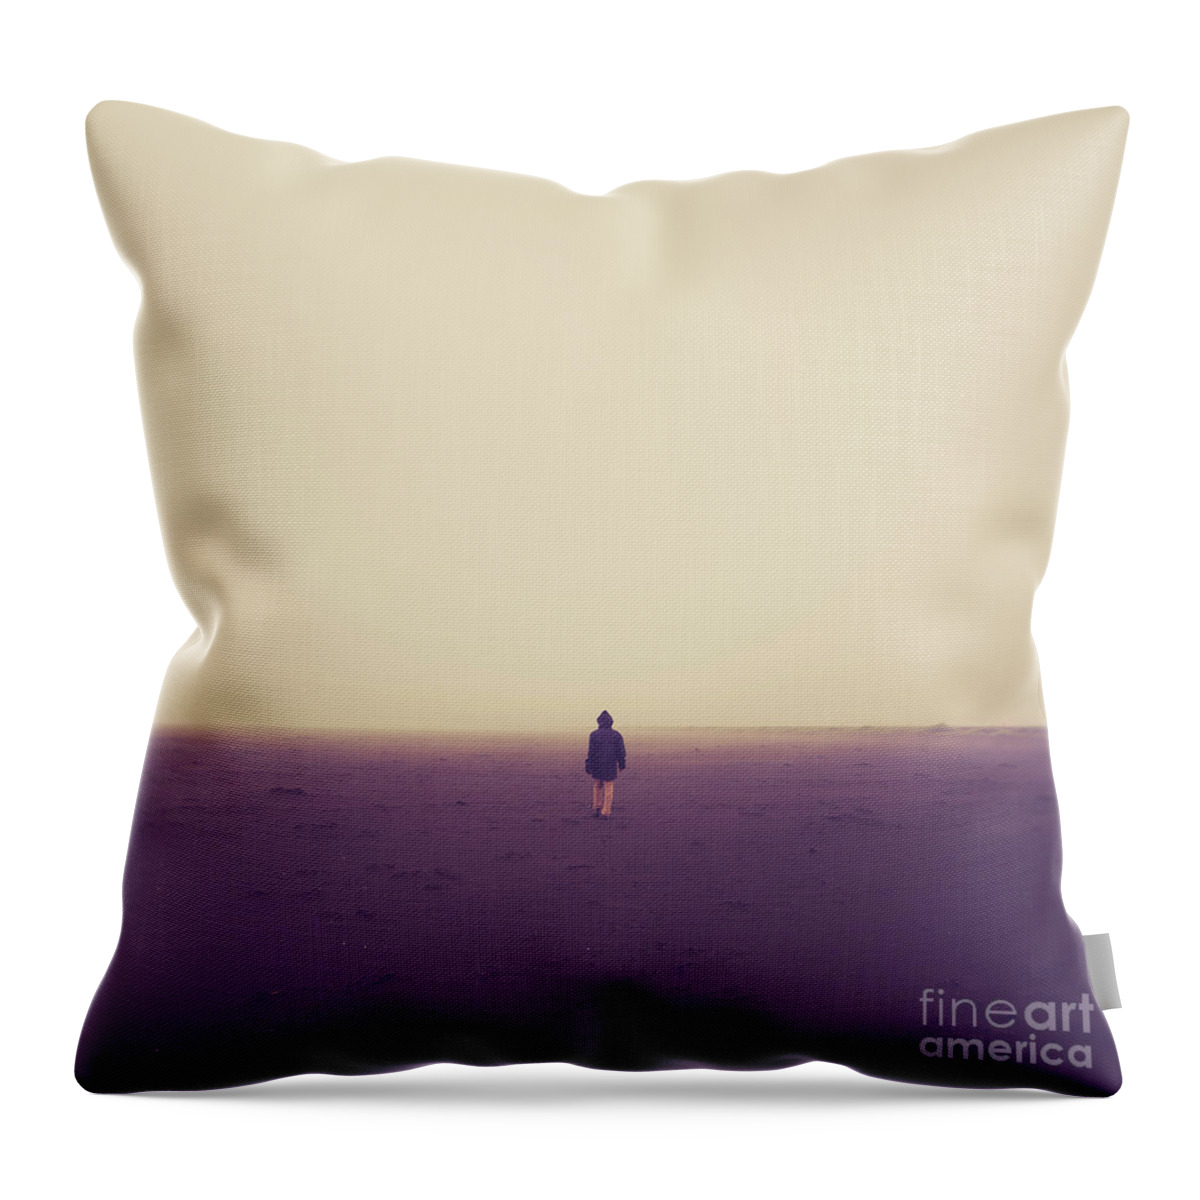 Iceland Throw Pillow featuring the photograph Lonely Hiker Iceland Square Format by Edward Fielding